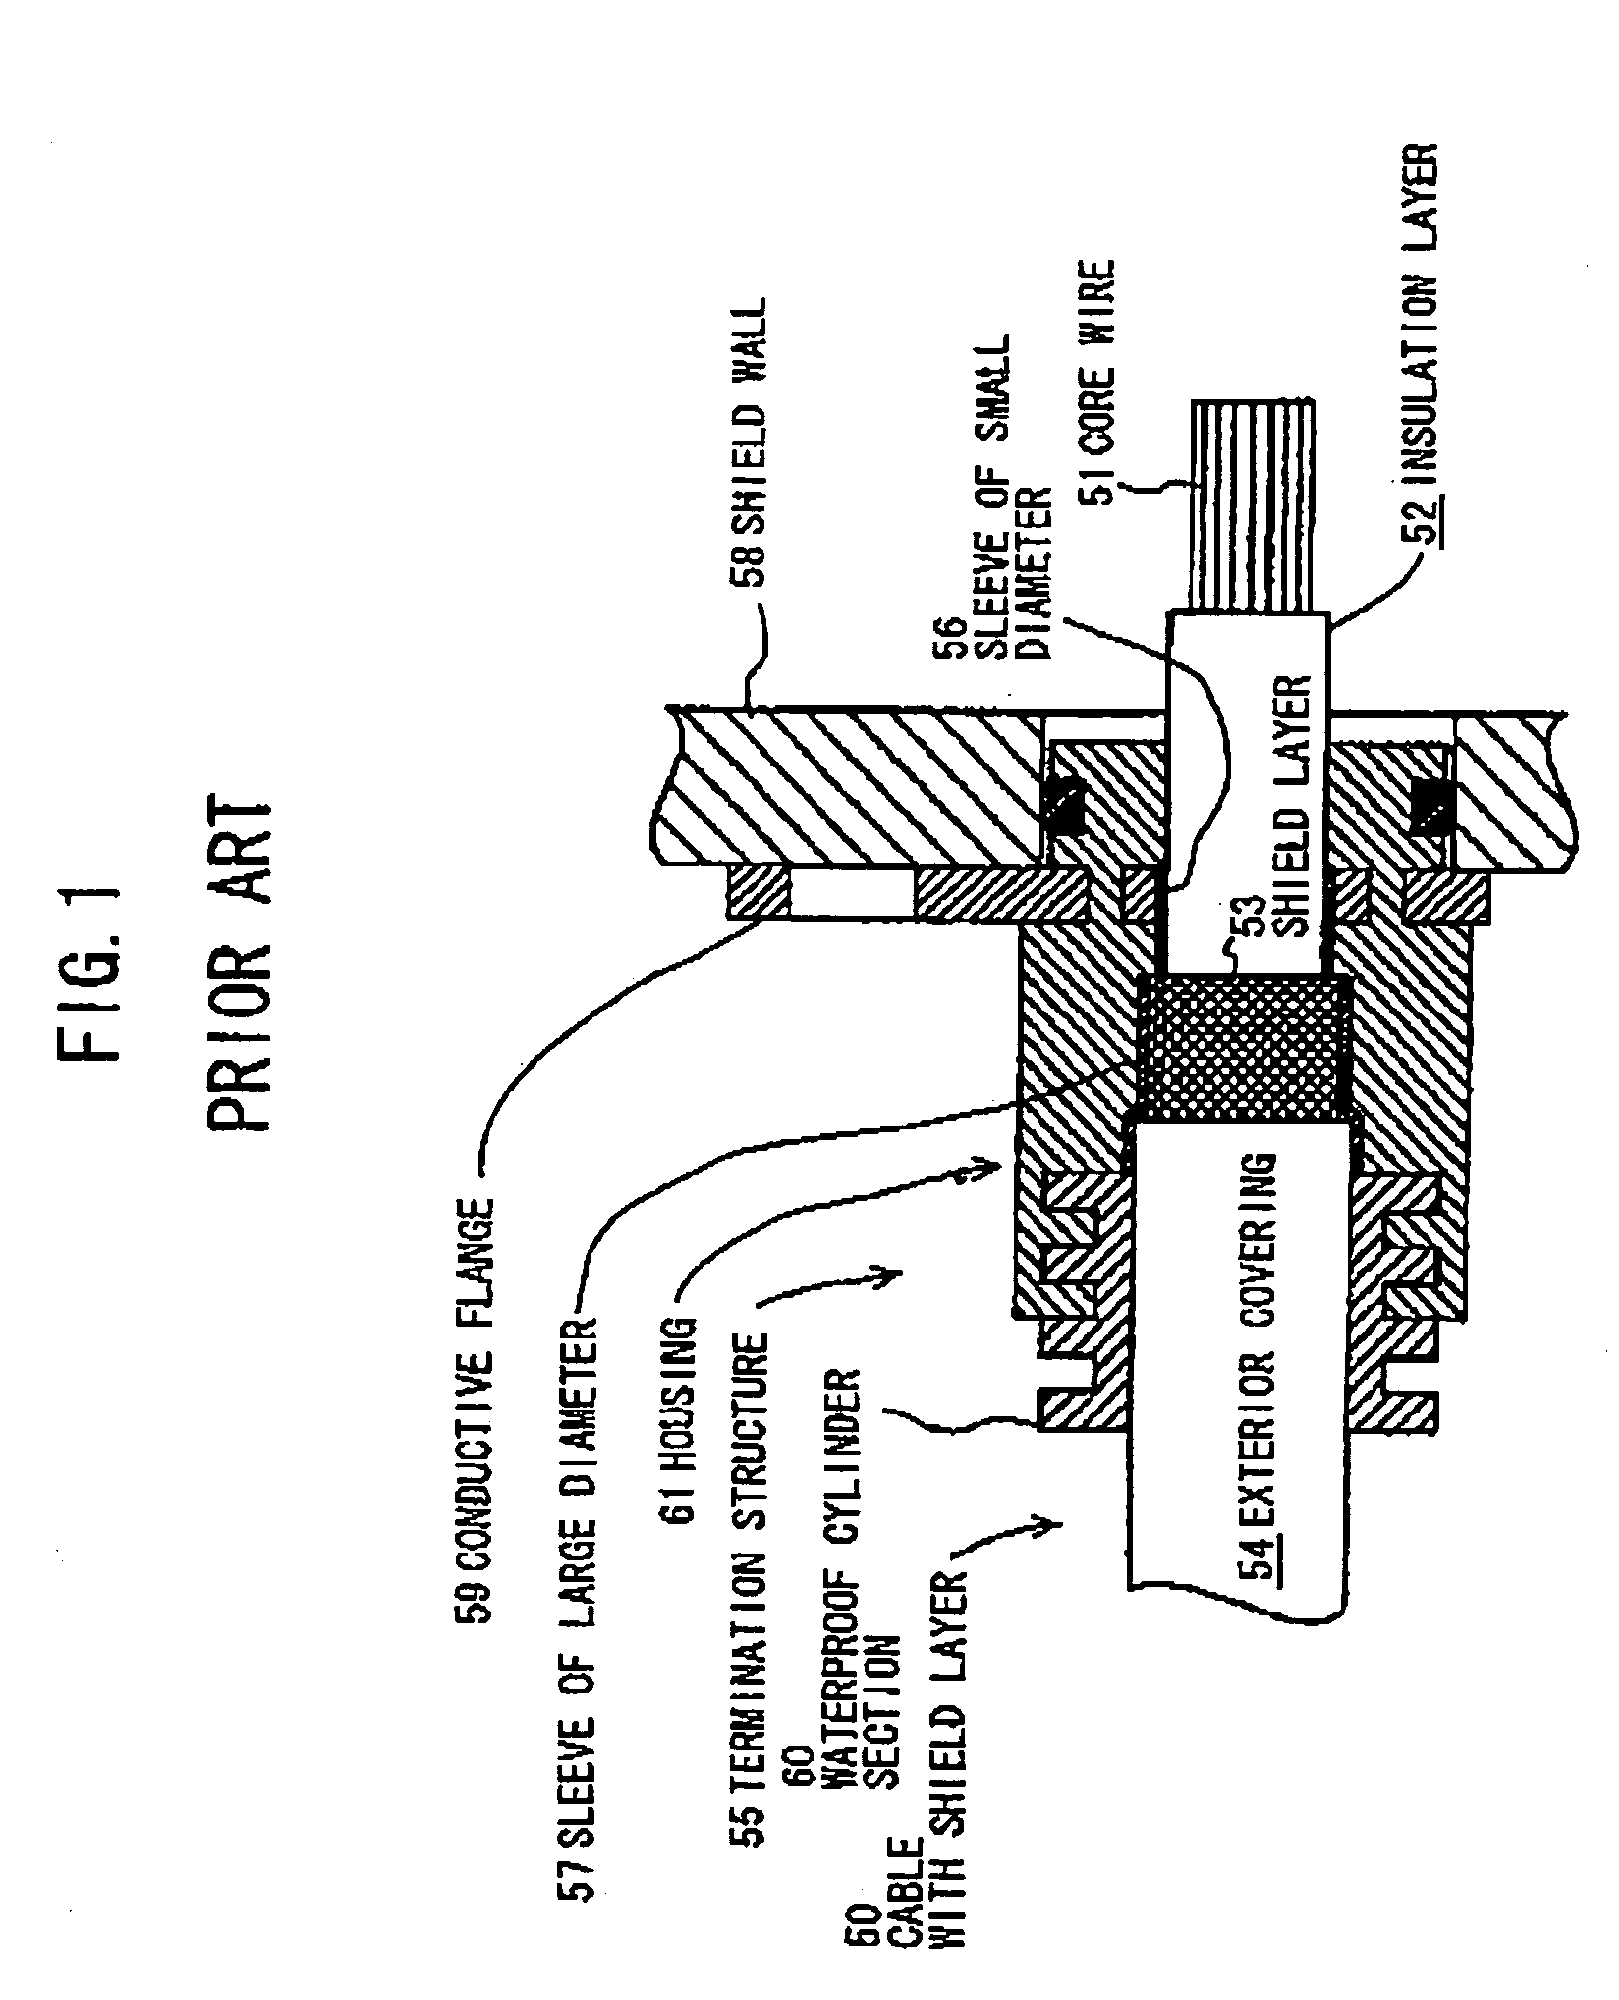 Termination structure of cable with shield layer